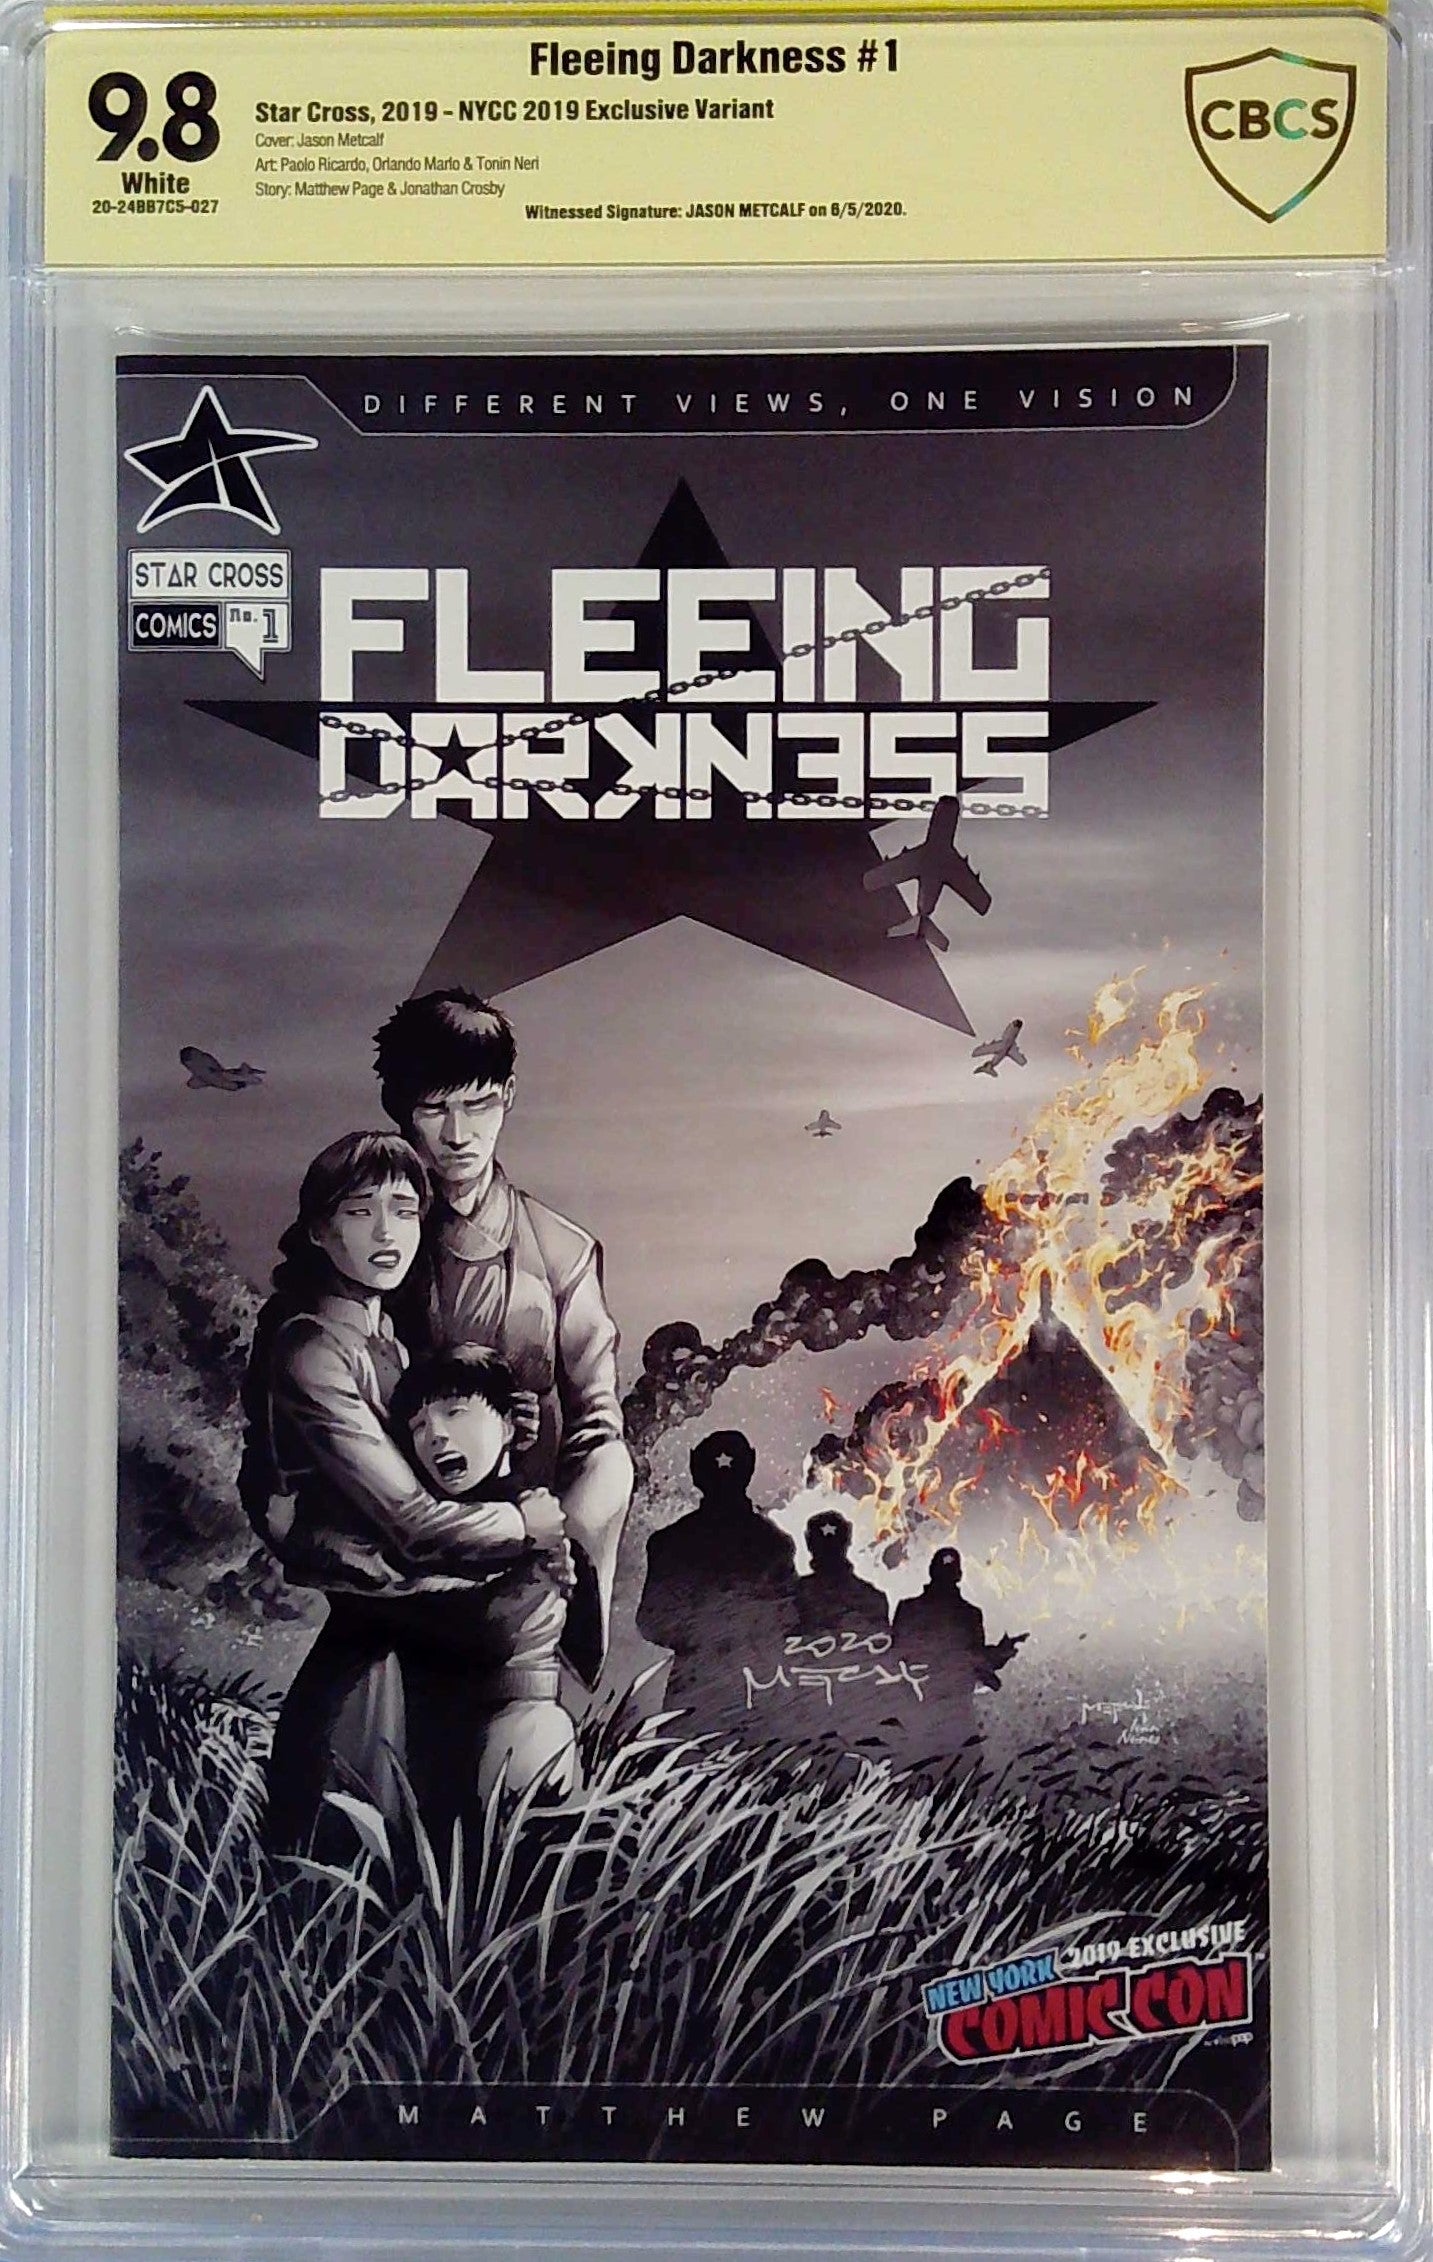 Fleeing Darkness #1 2019 NYCC 9.8 CBCS Yellow Label